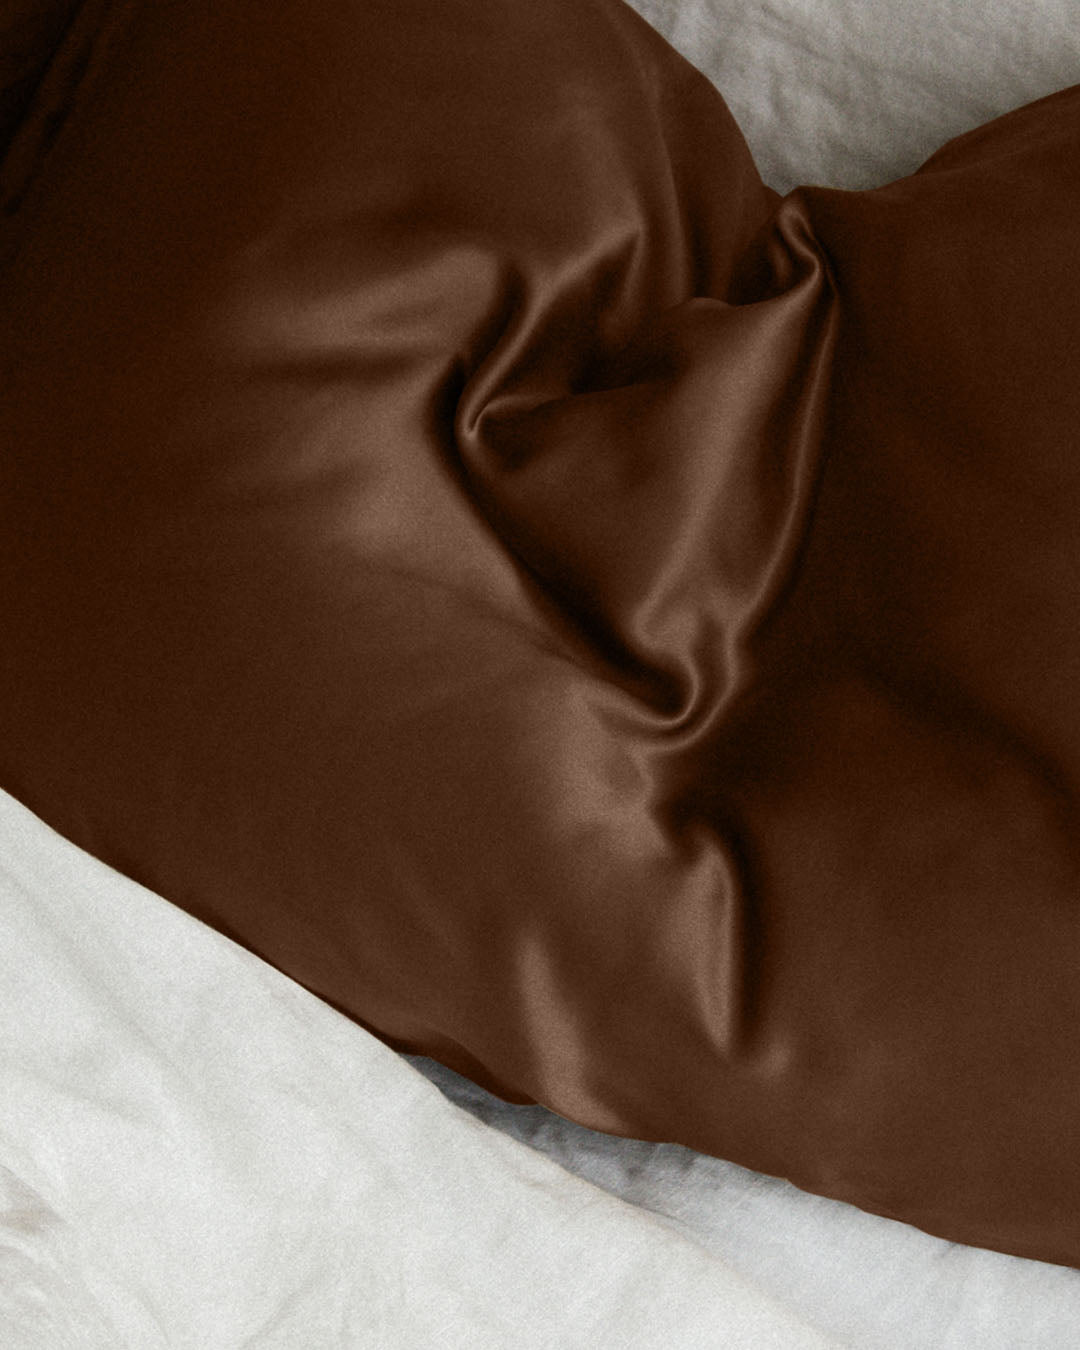 Cocoa Beauty Pillow Eye Masks and Pillowcases by Penney + Bennett - Prae Store